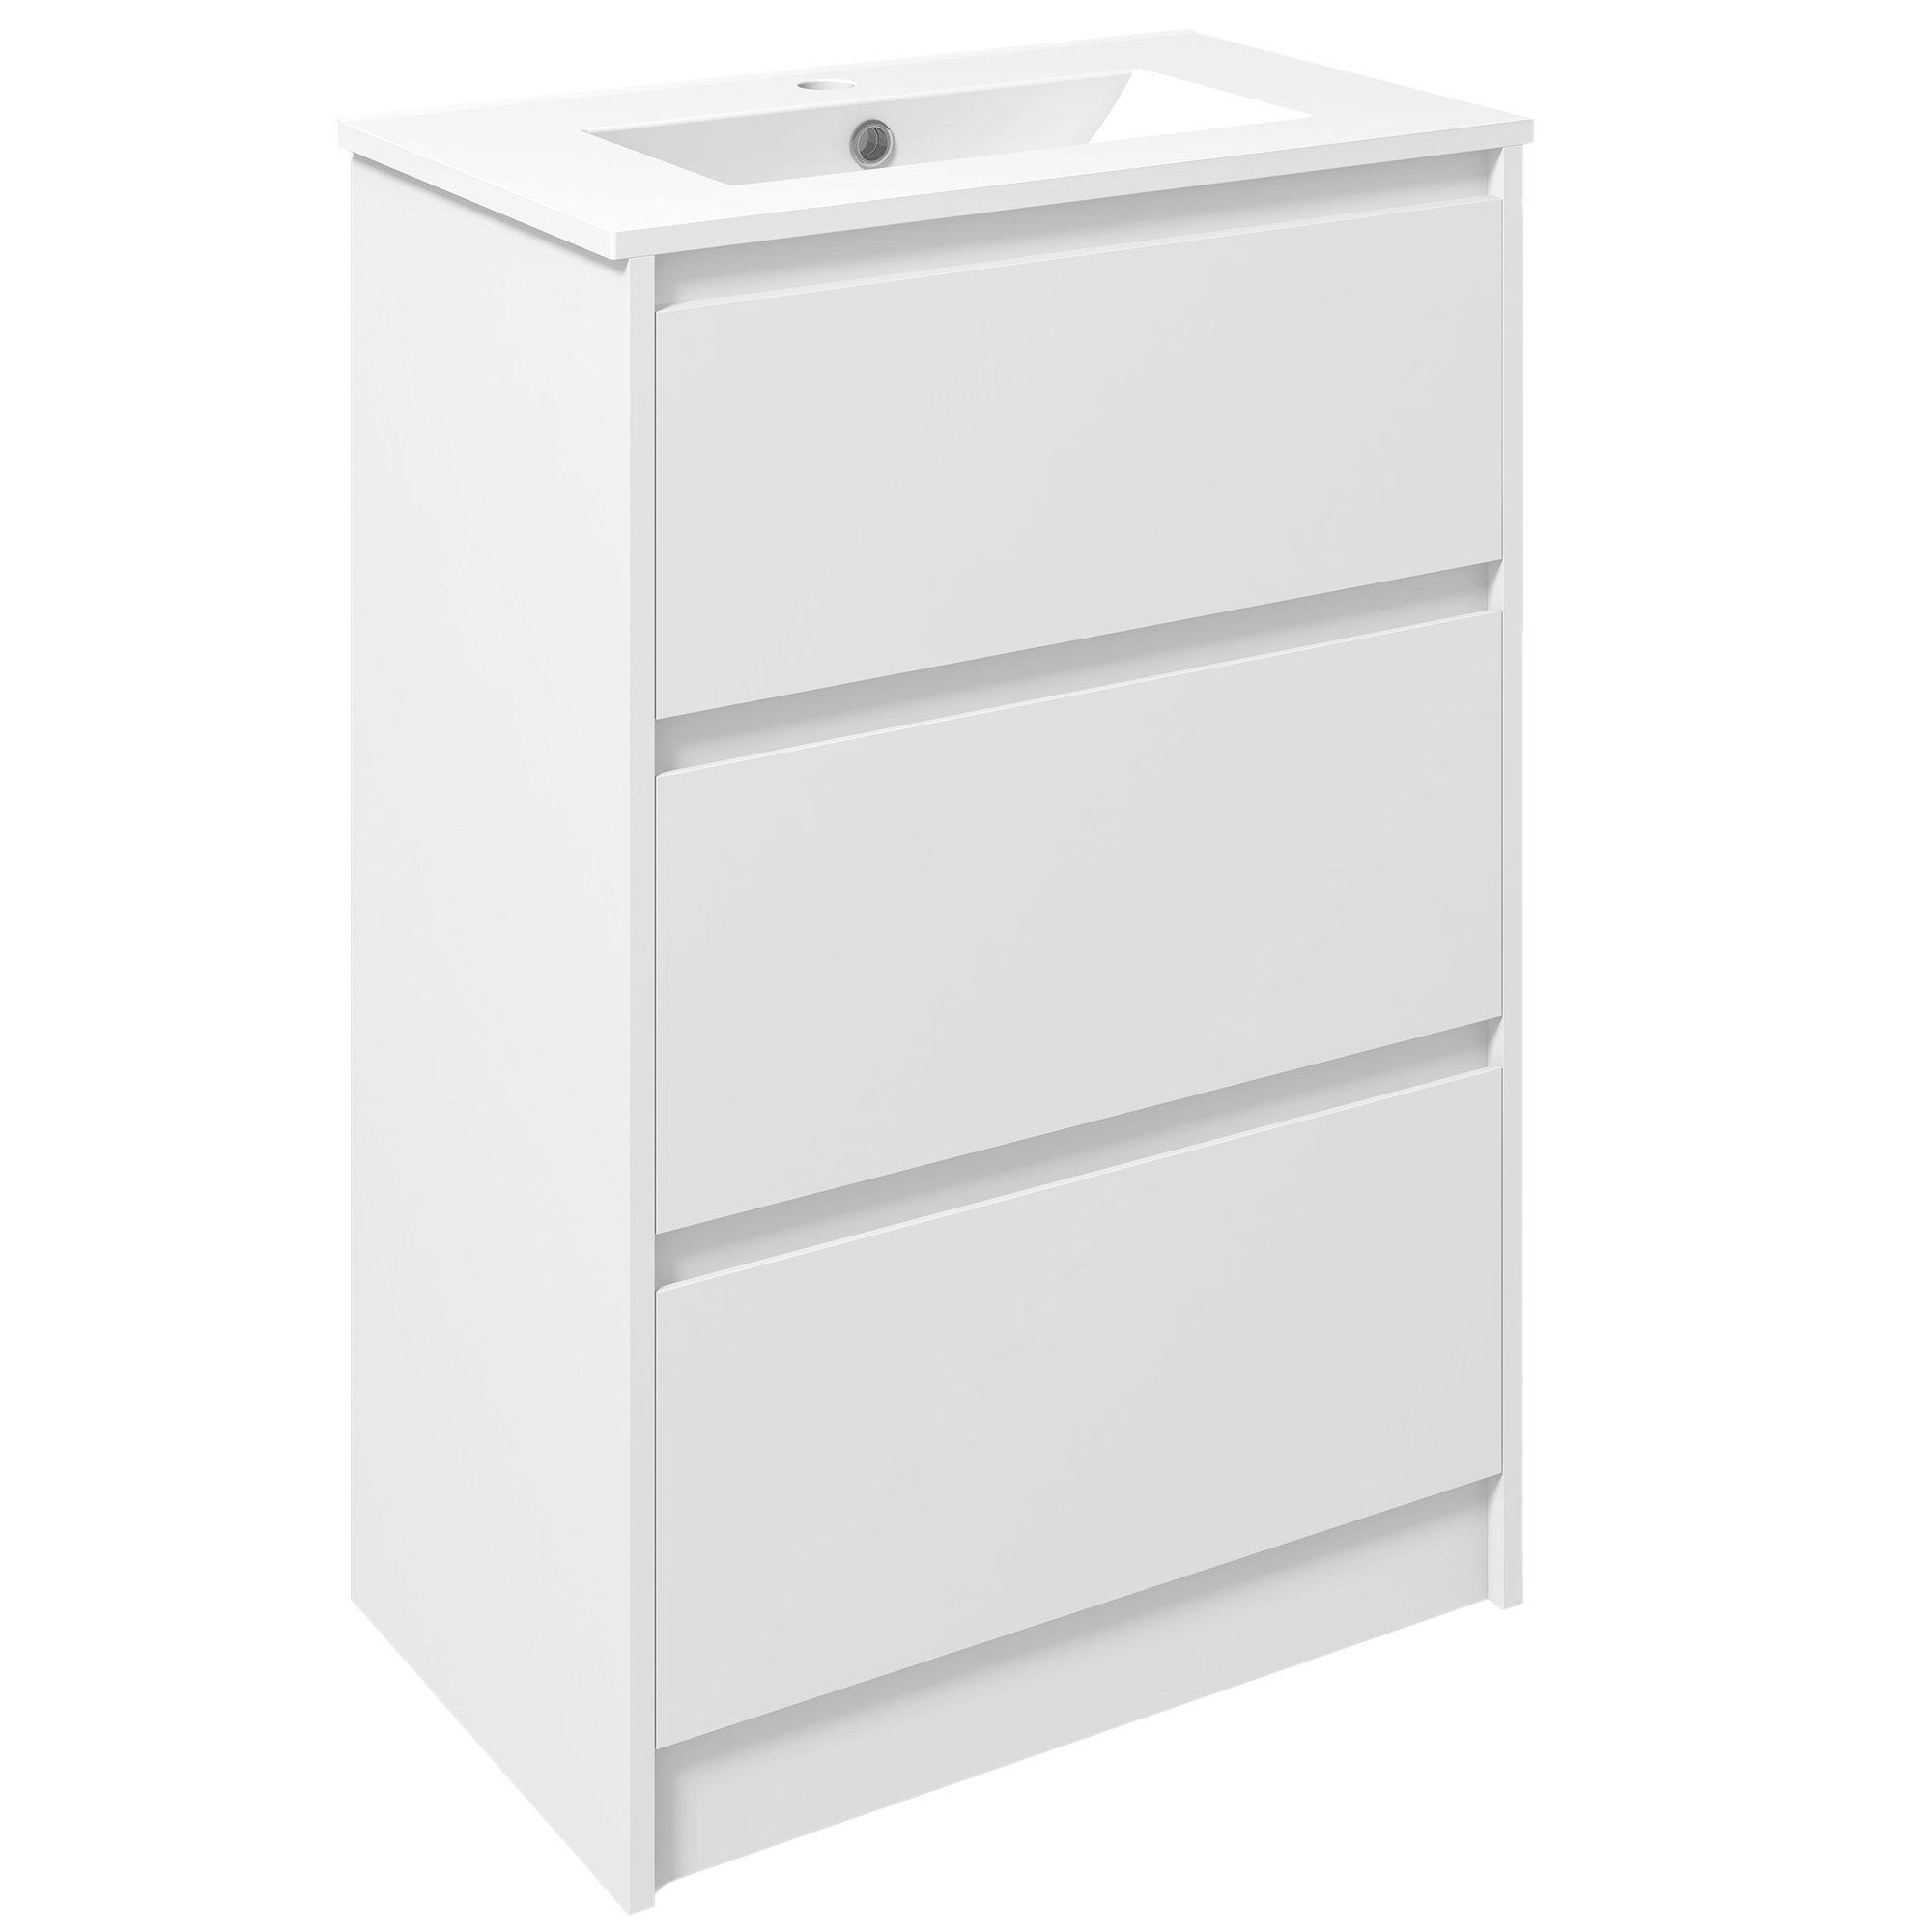 600mm Bathroom Vanity Unit with Basin Single Tap Hole 2 Drawers